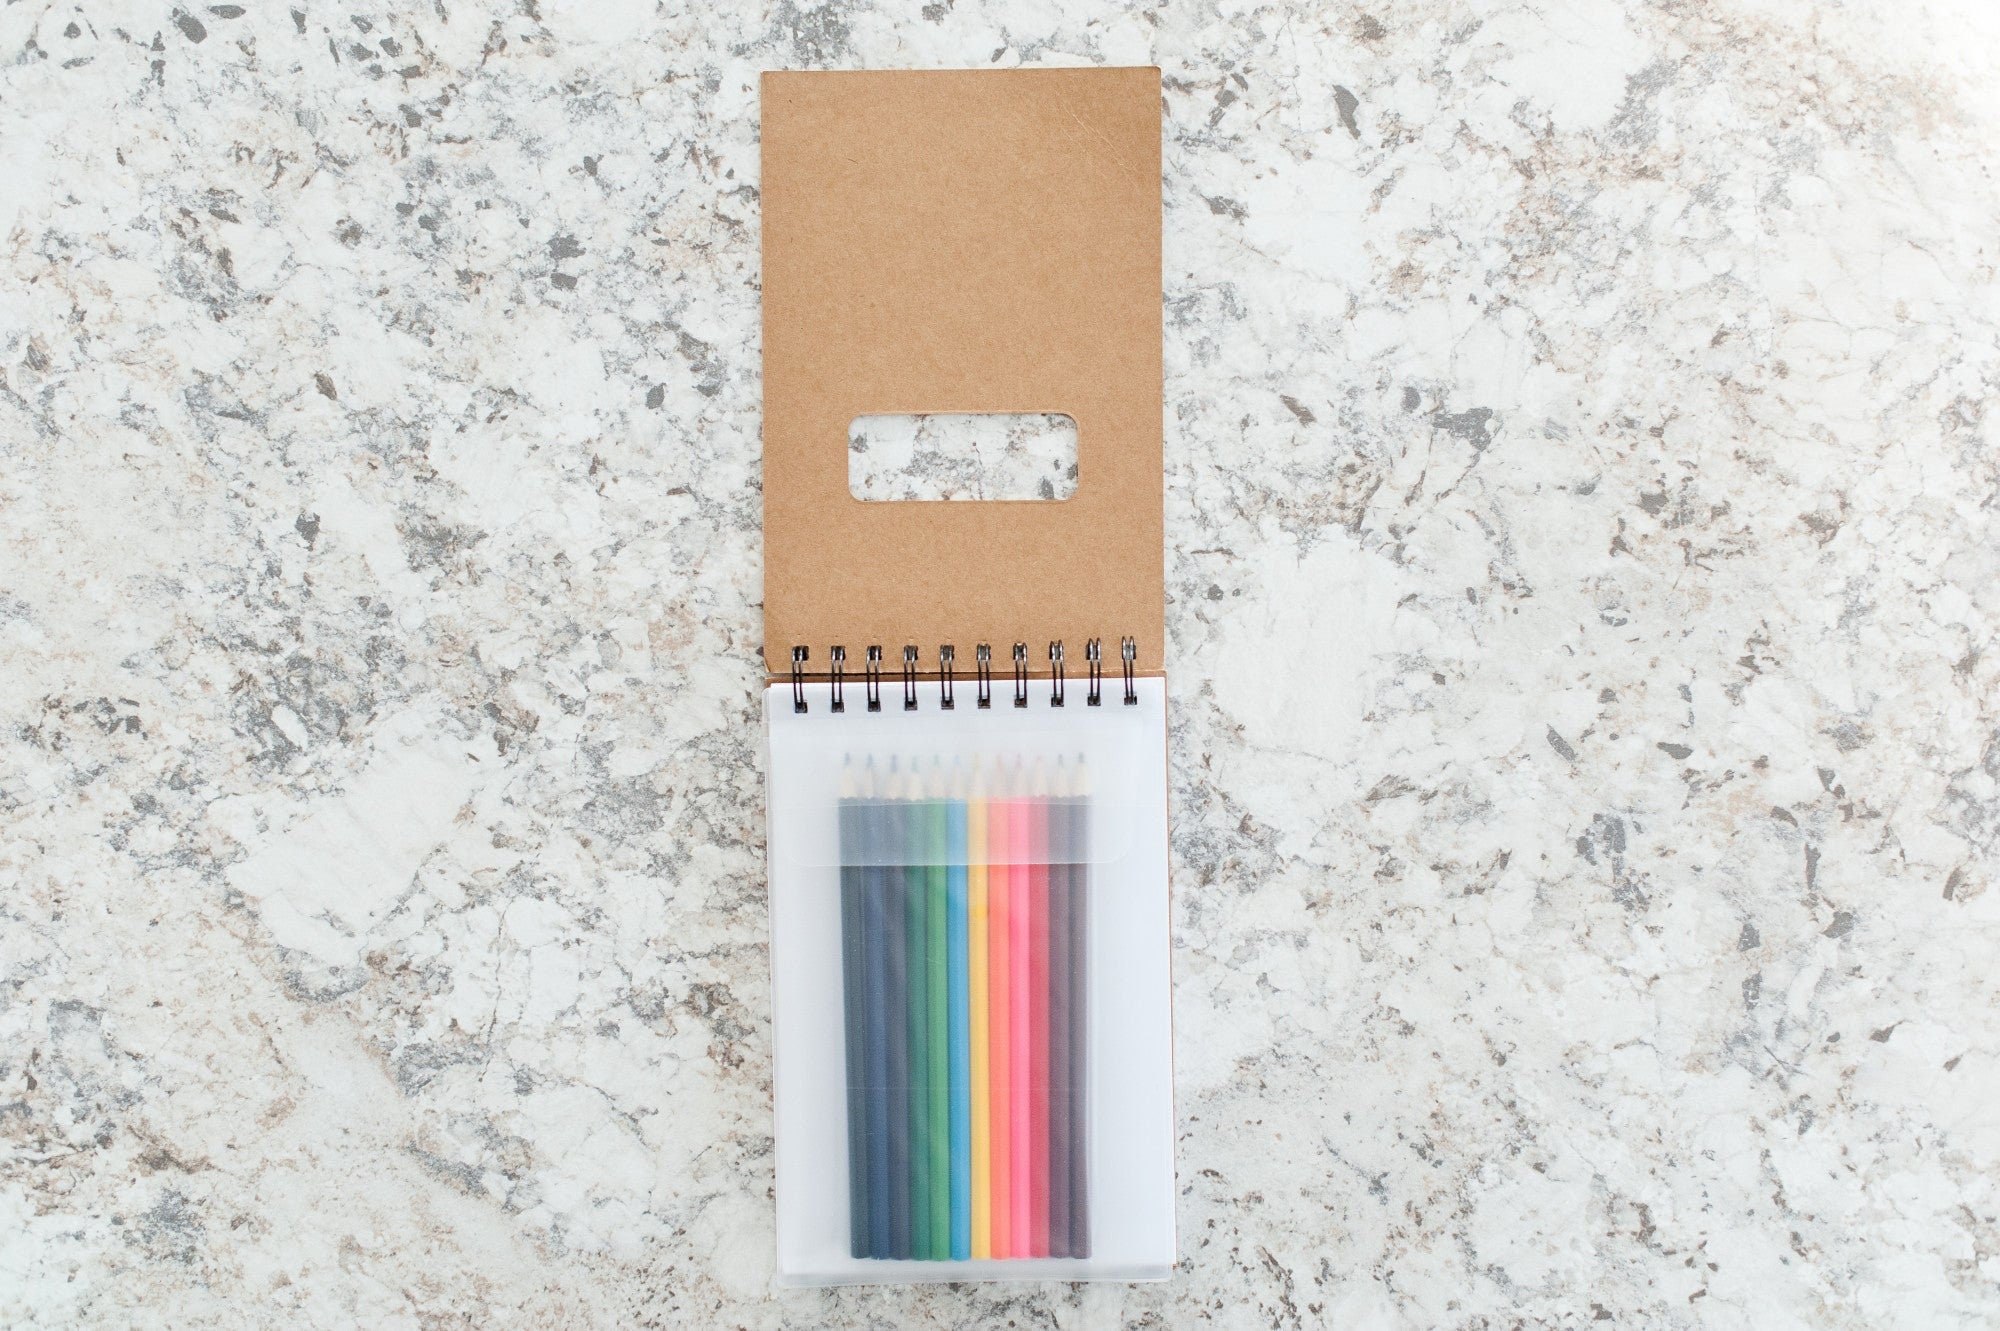 Personalized Sketch Pad – A Gift Personalized